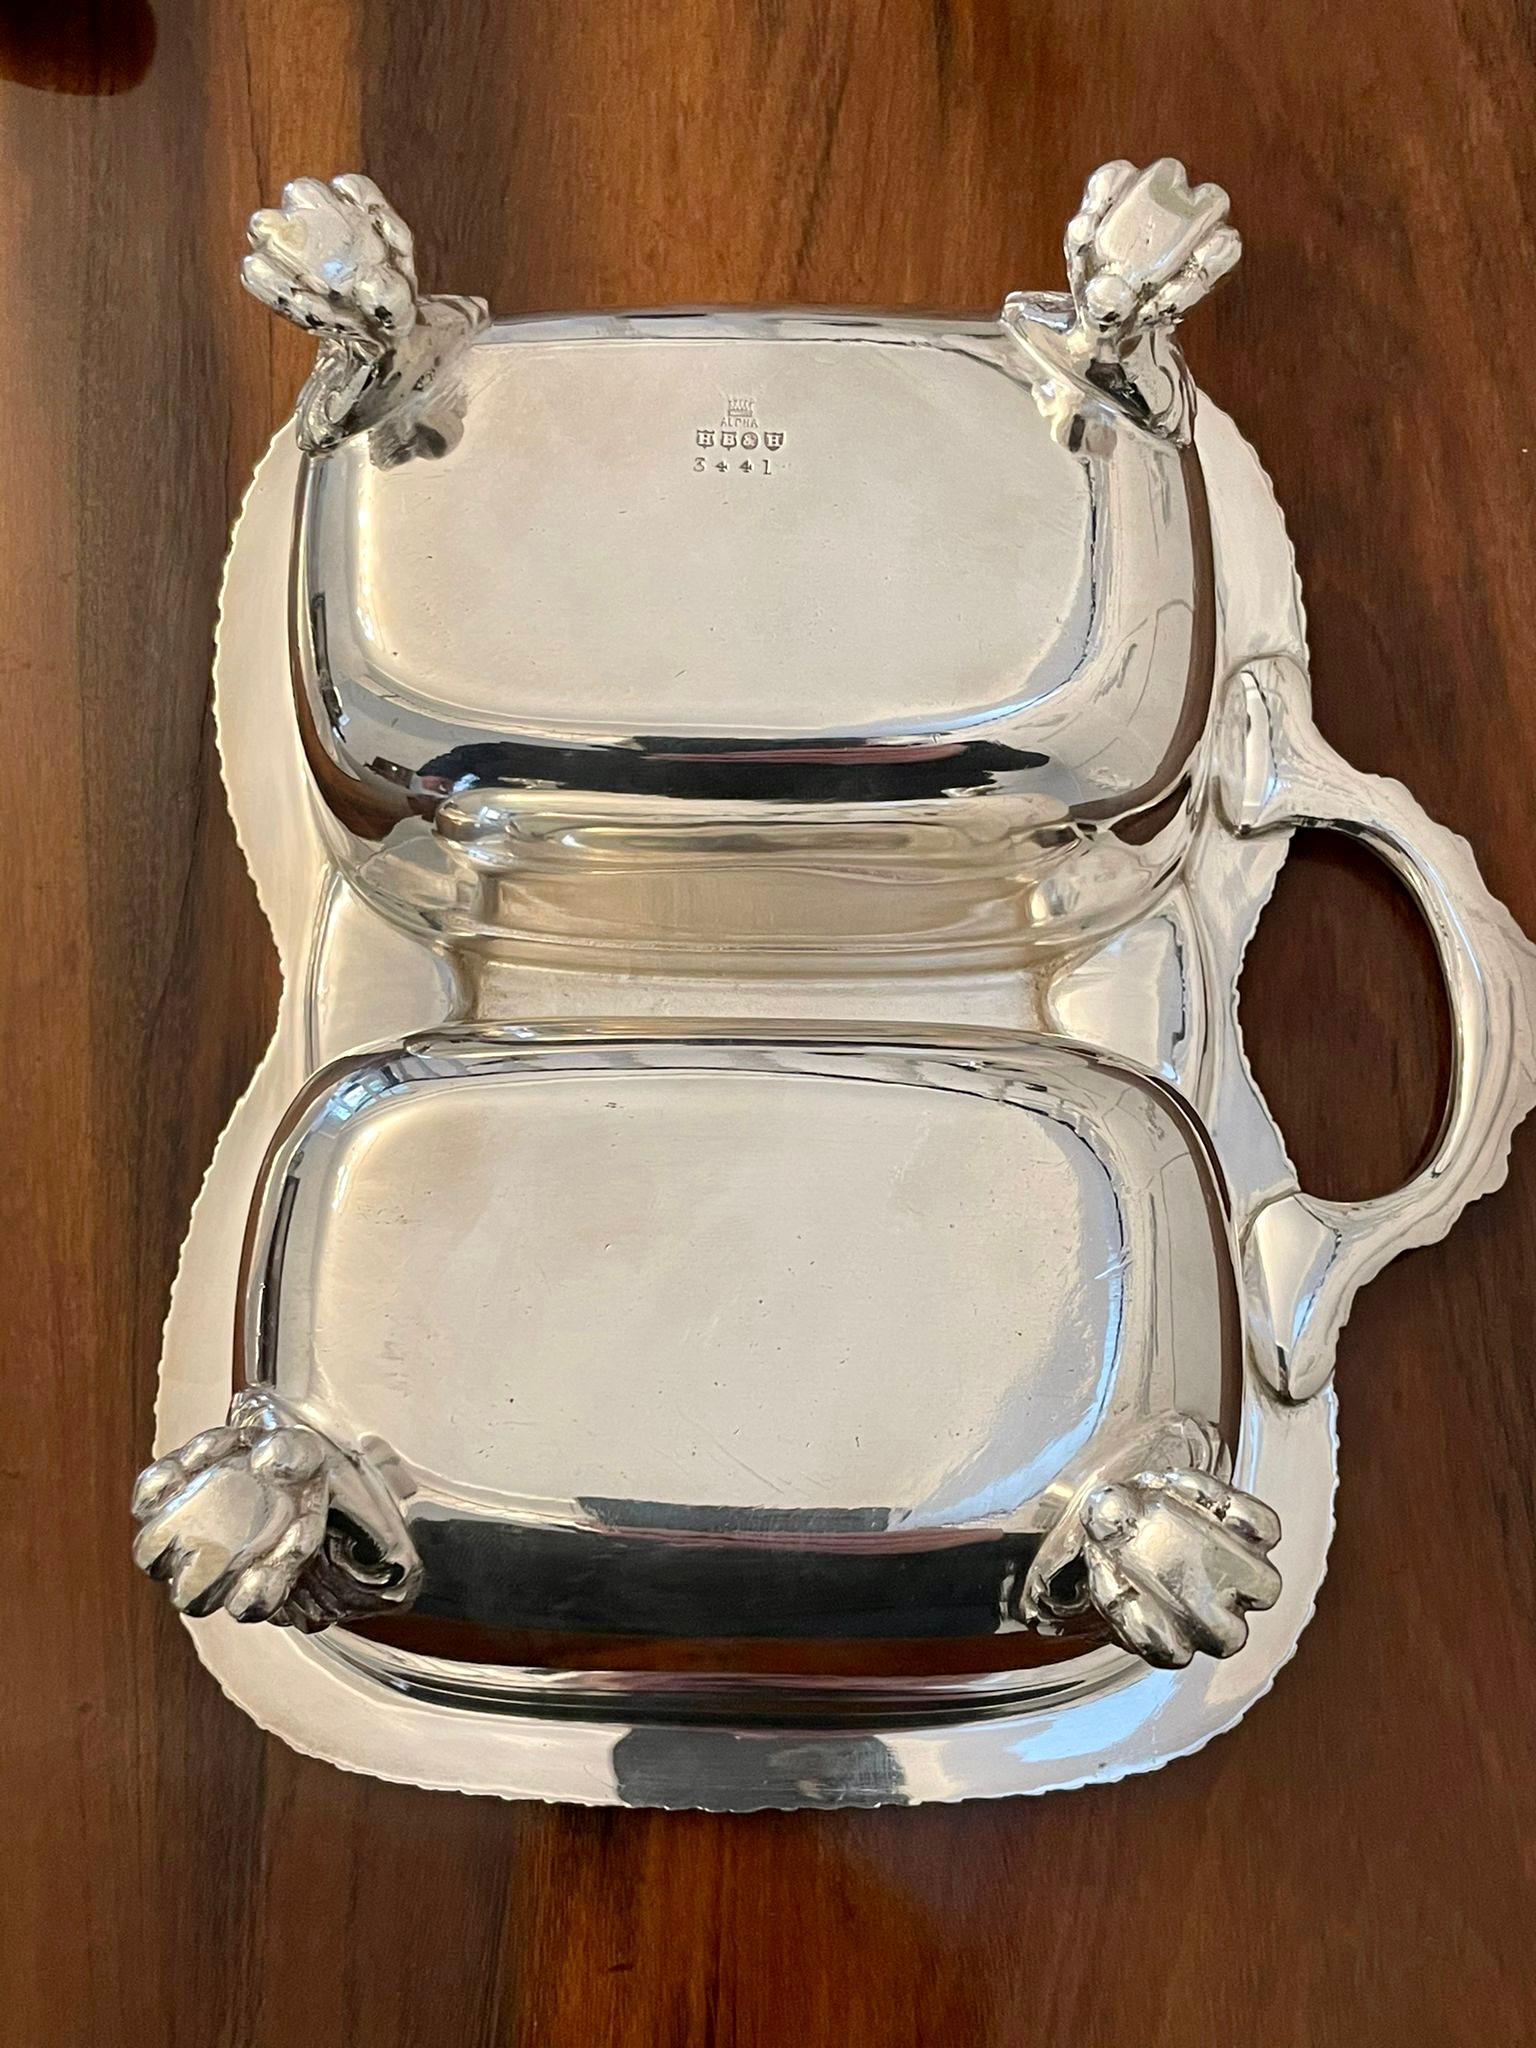 Late 19th Century Unusual Antique Victorian Quality Silver Plated Double Serving Dish